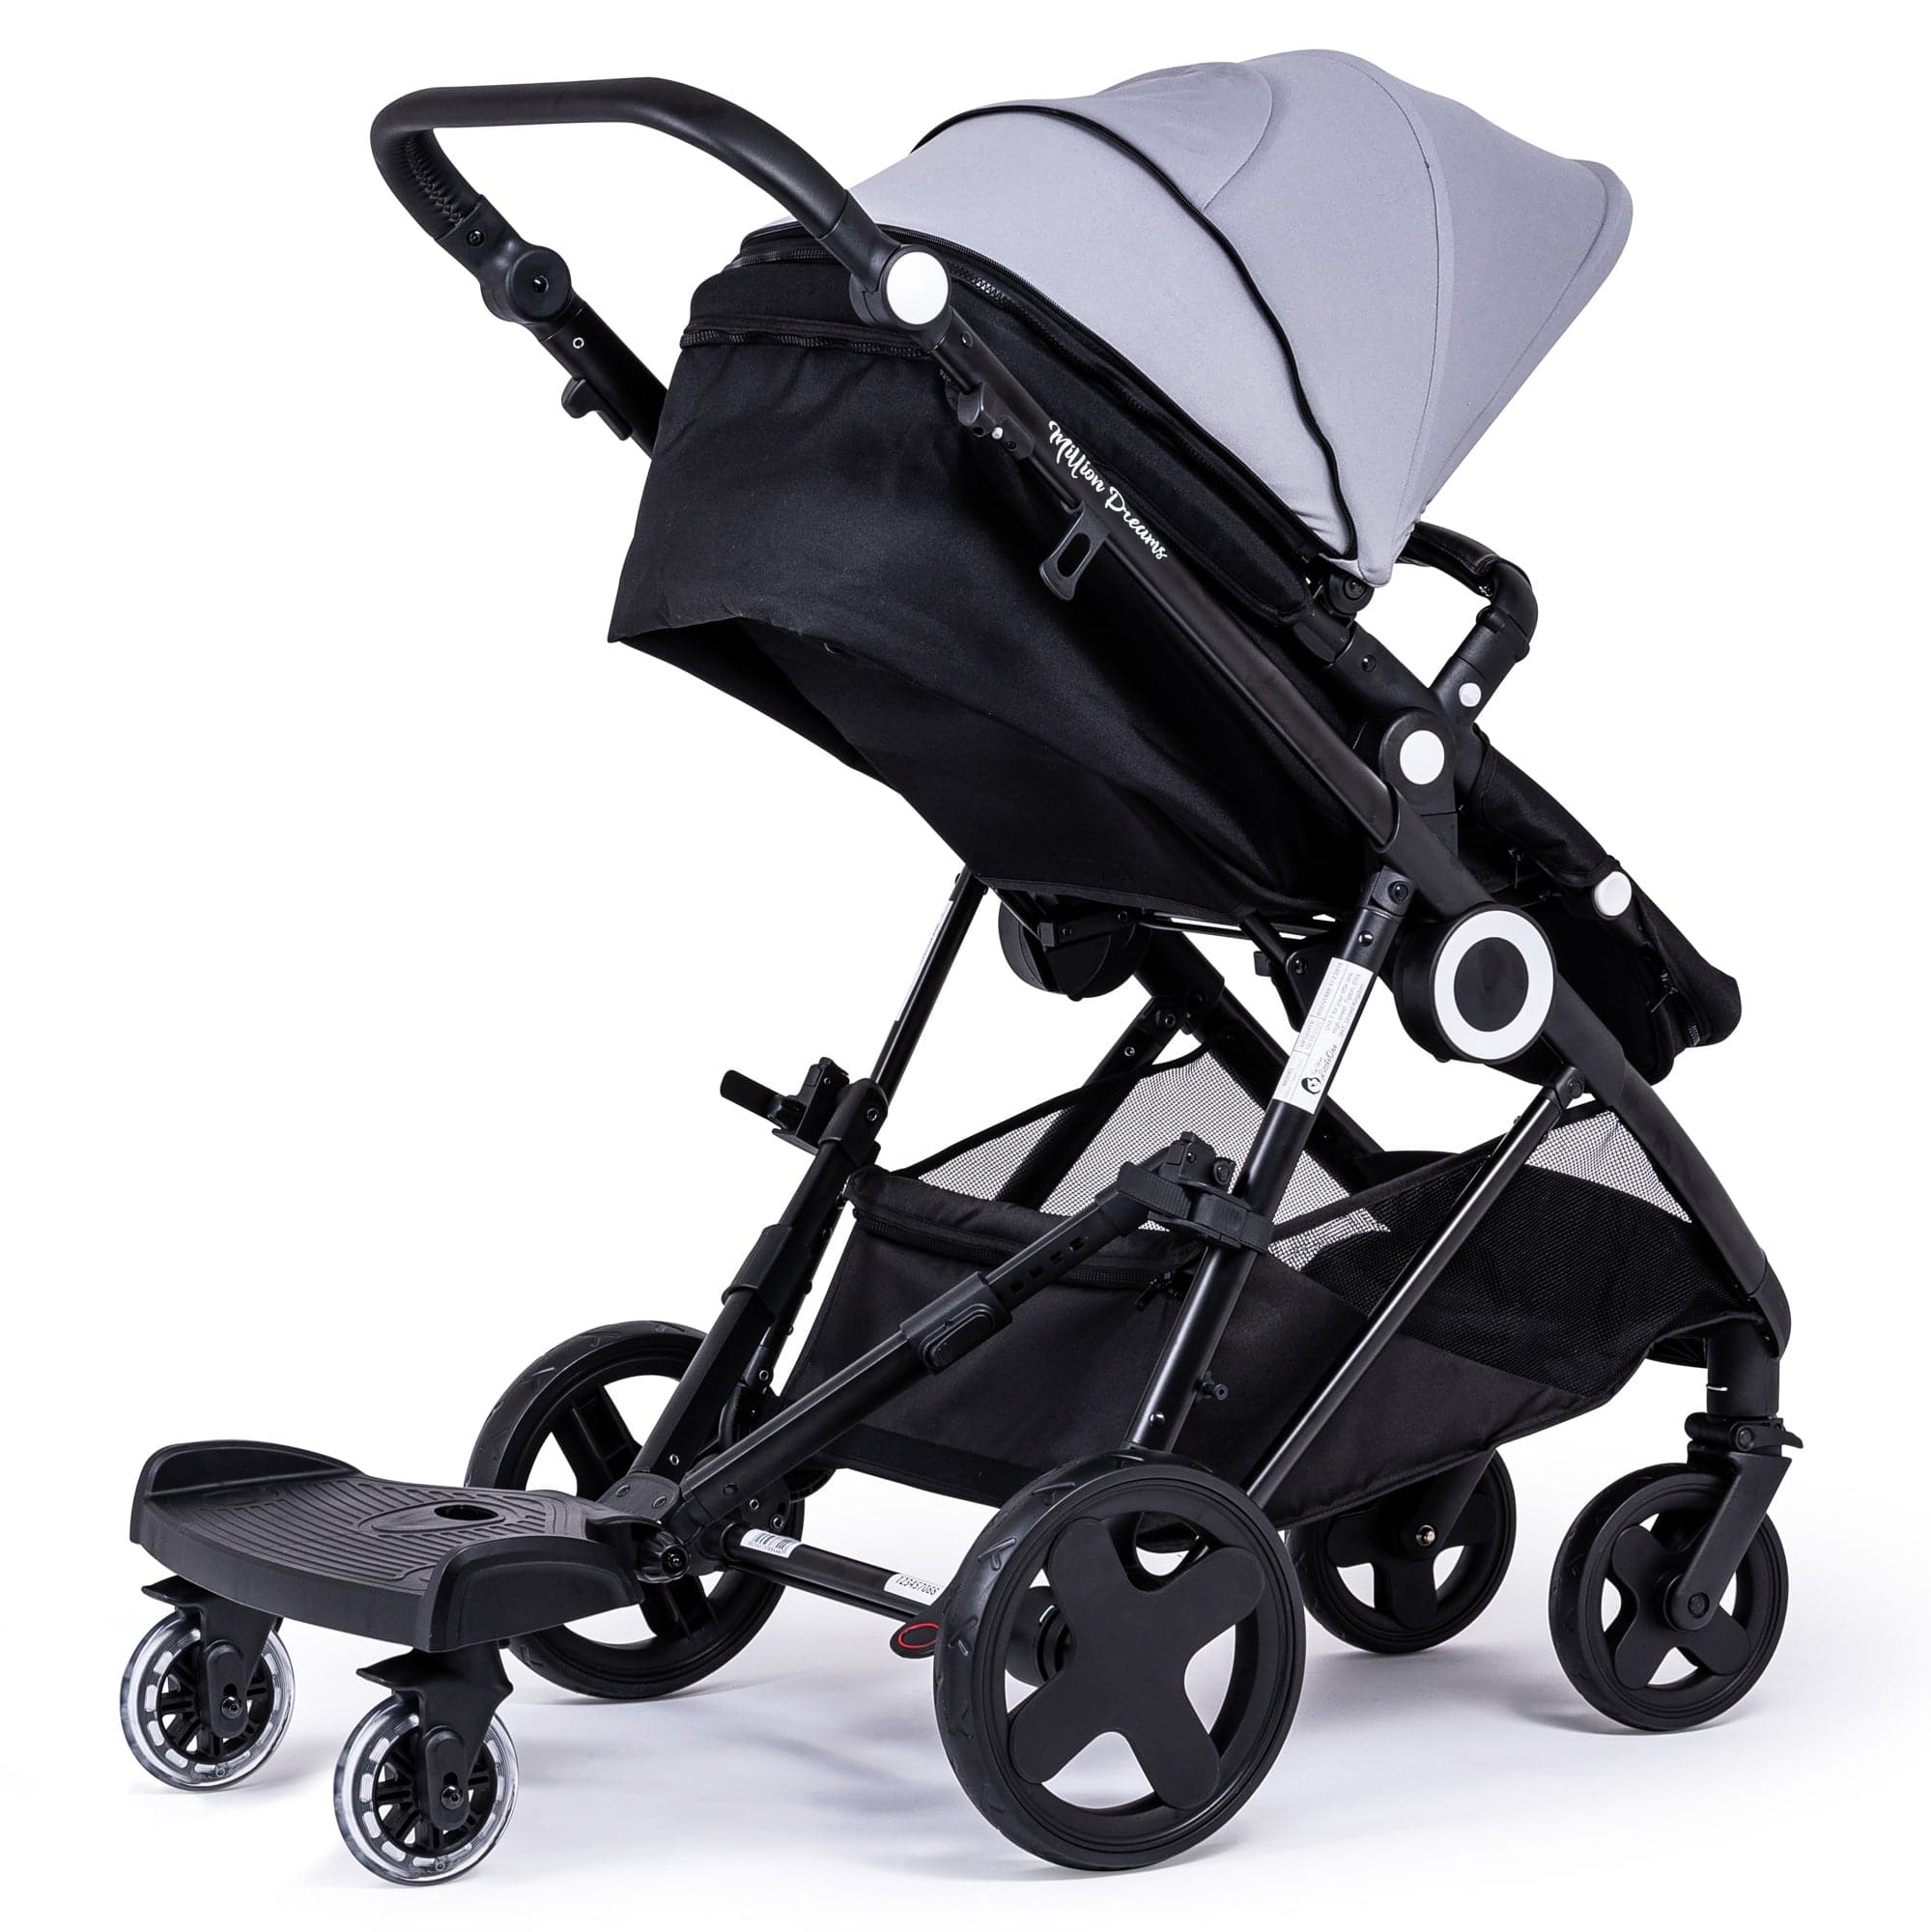 Ride On Board with Seat Compatible with Casual - For Your Little One